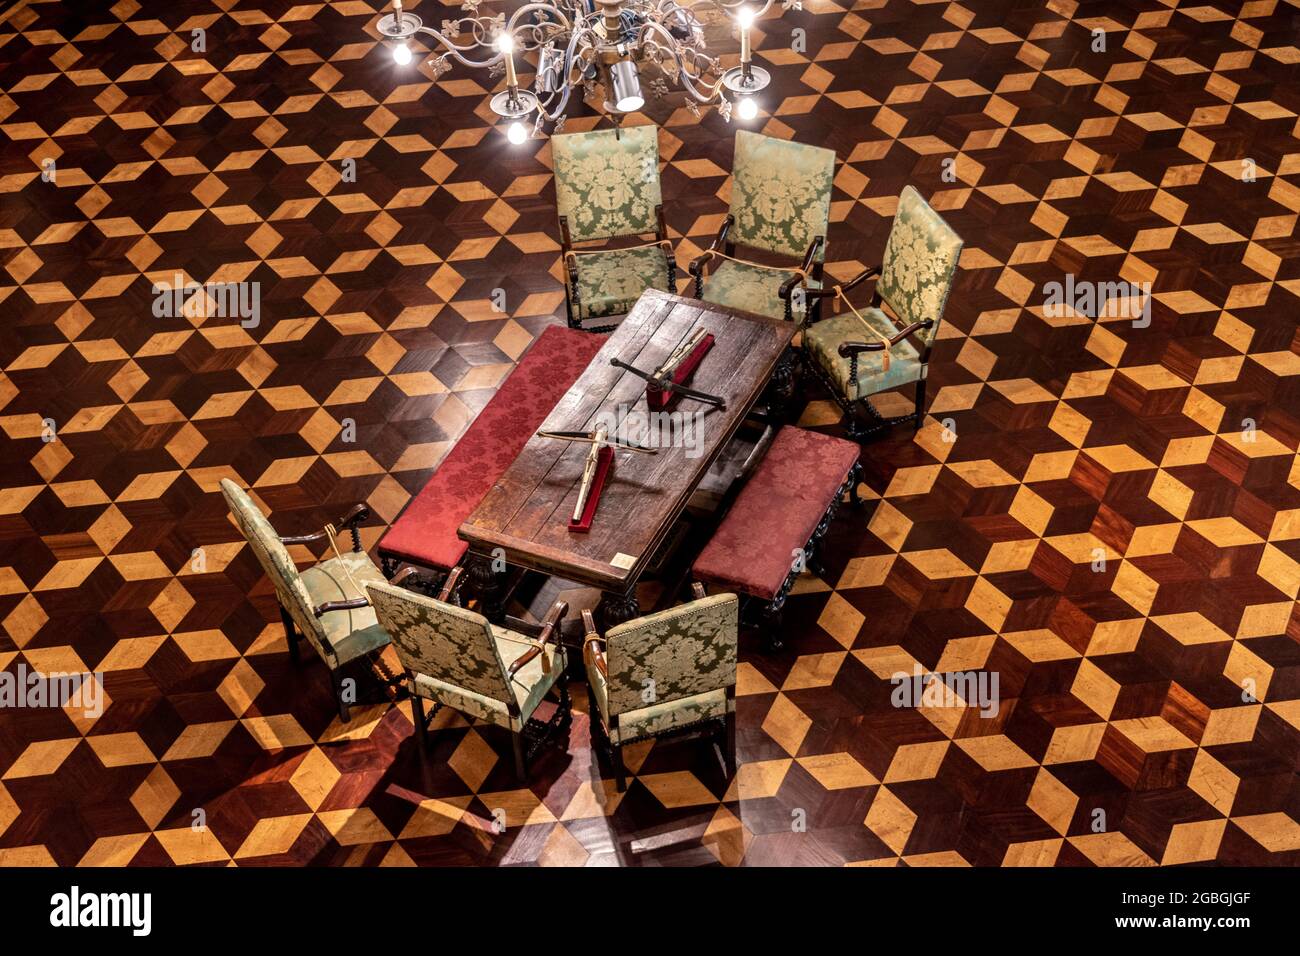 High angle view of two crossbows on a table surrounded by antique chairs at the Museum of Decorative Arts in Buenos Aires, Argentina Stock Photo